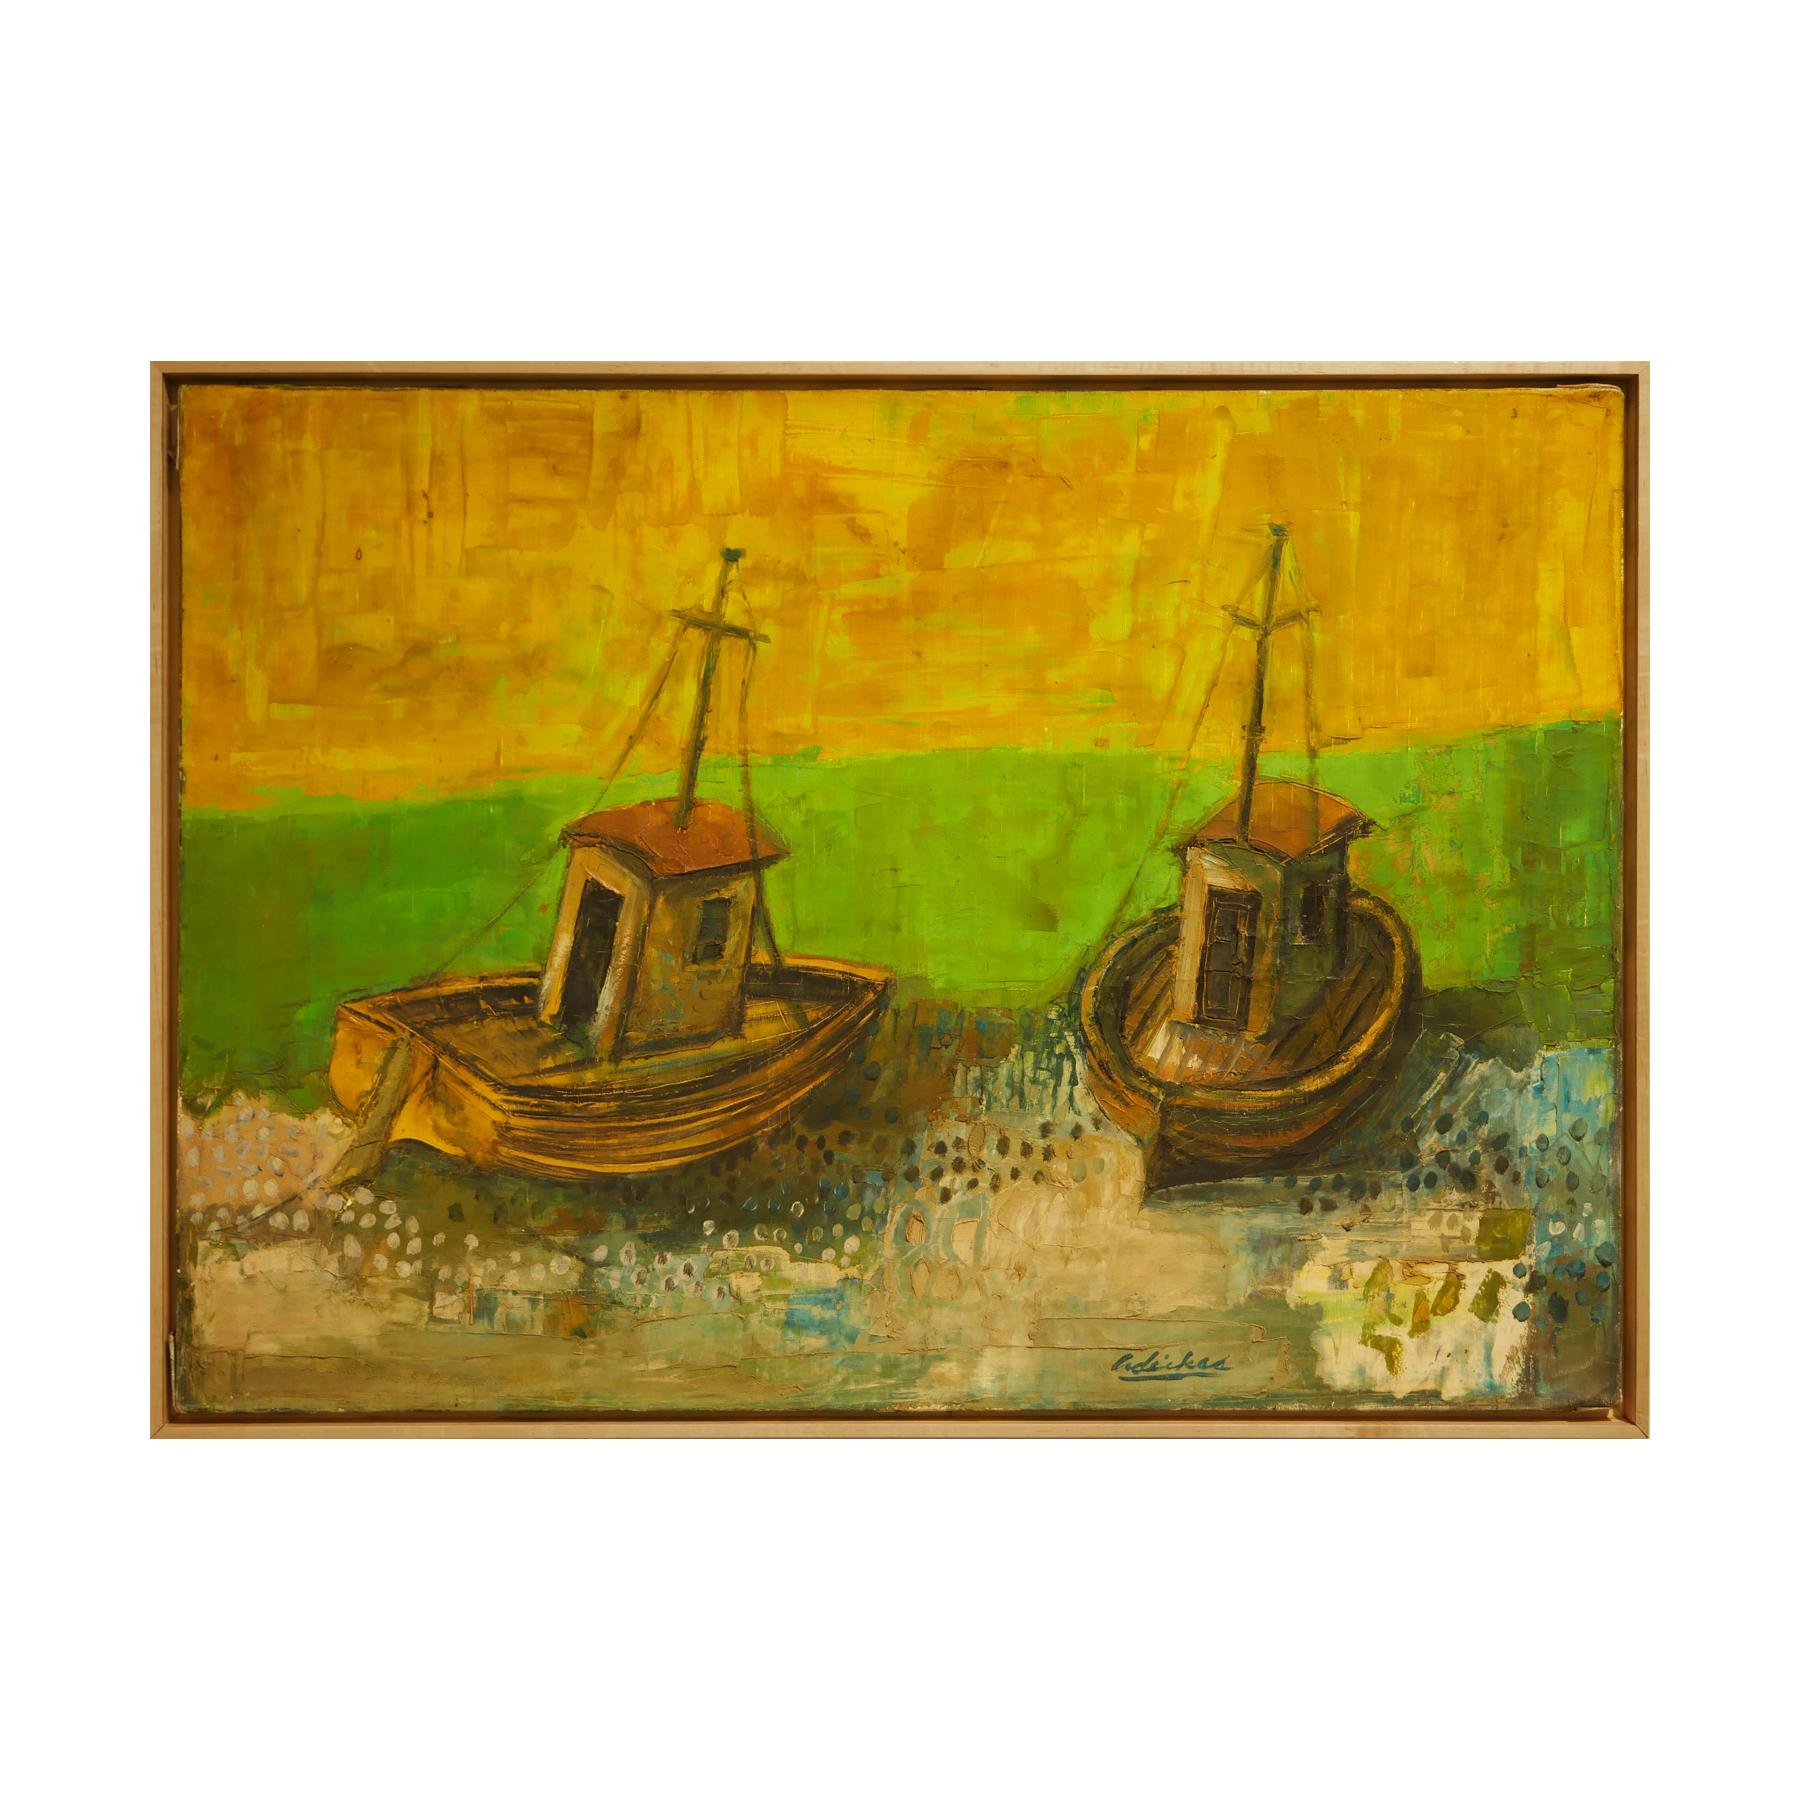 Modern geometric abstract night scene by Houston, TX artist David Adickes. The work features two wooden boats resting along a green shore. Signed by the artist at the bottom right and displayed in a thin floating wooden frame. 

Dimensions WIthout